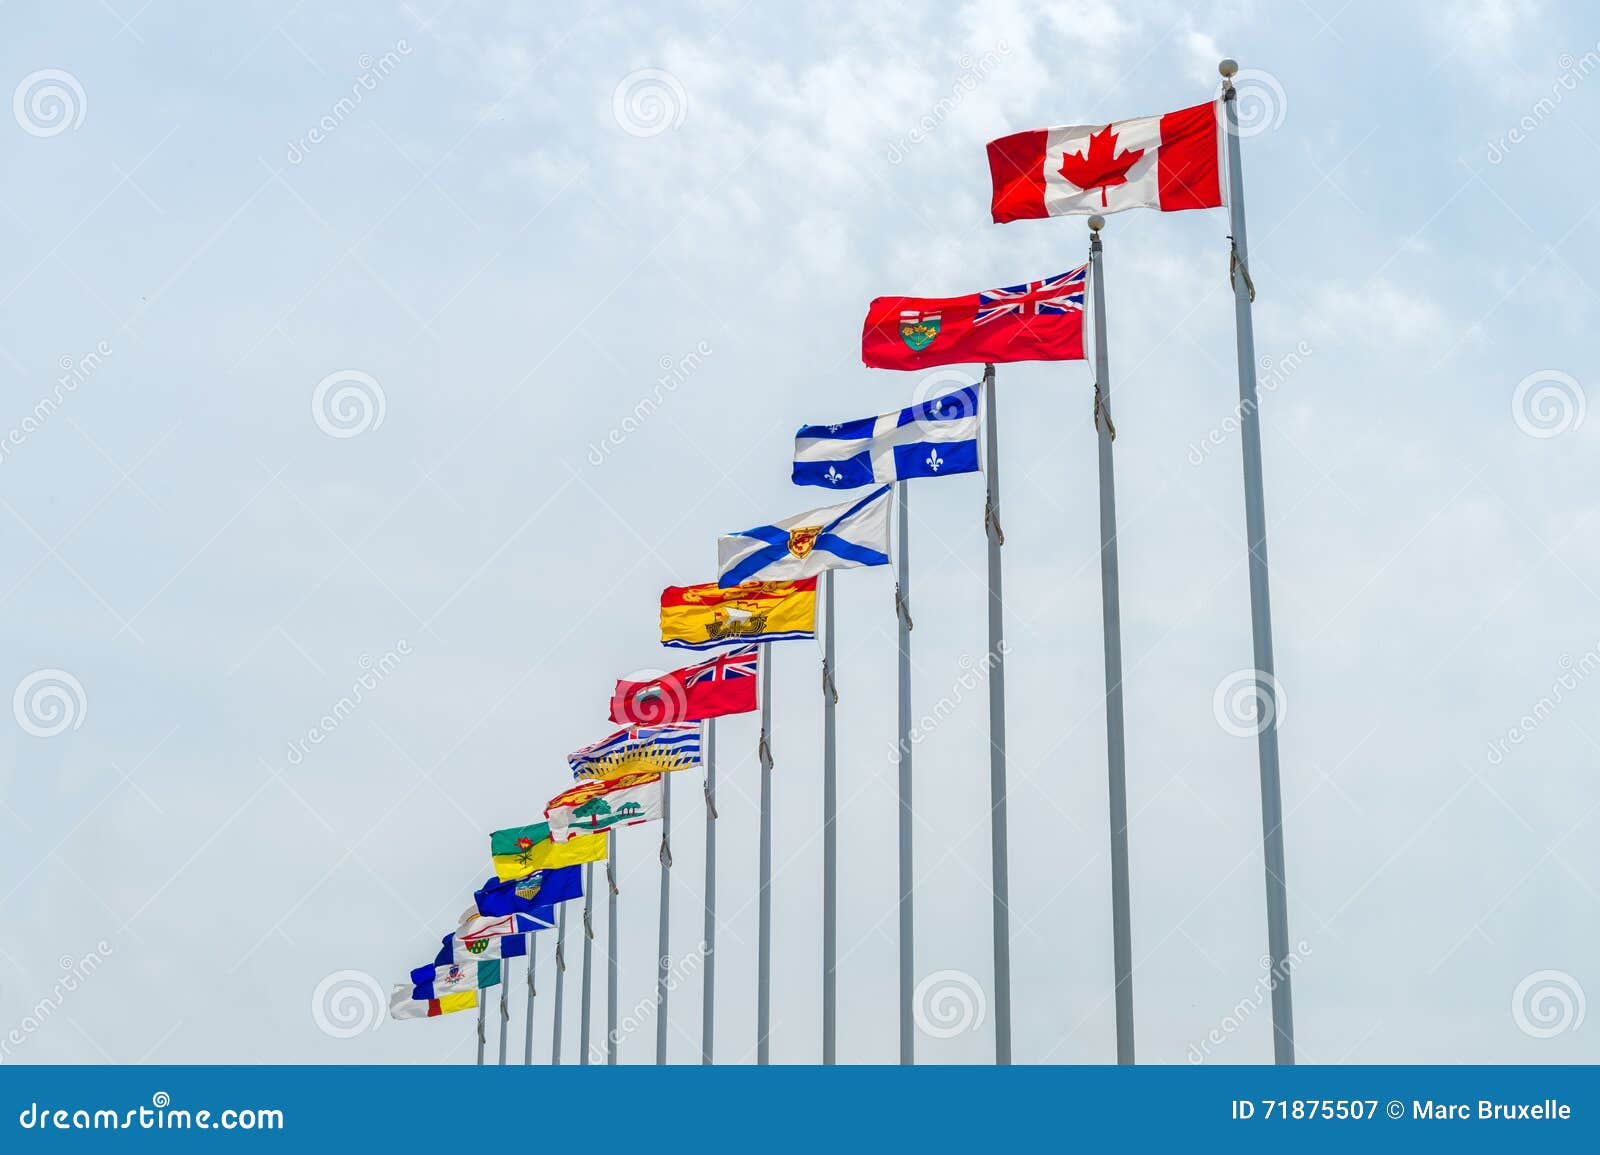 canada and province flags